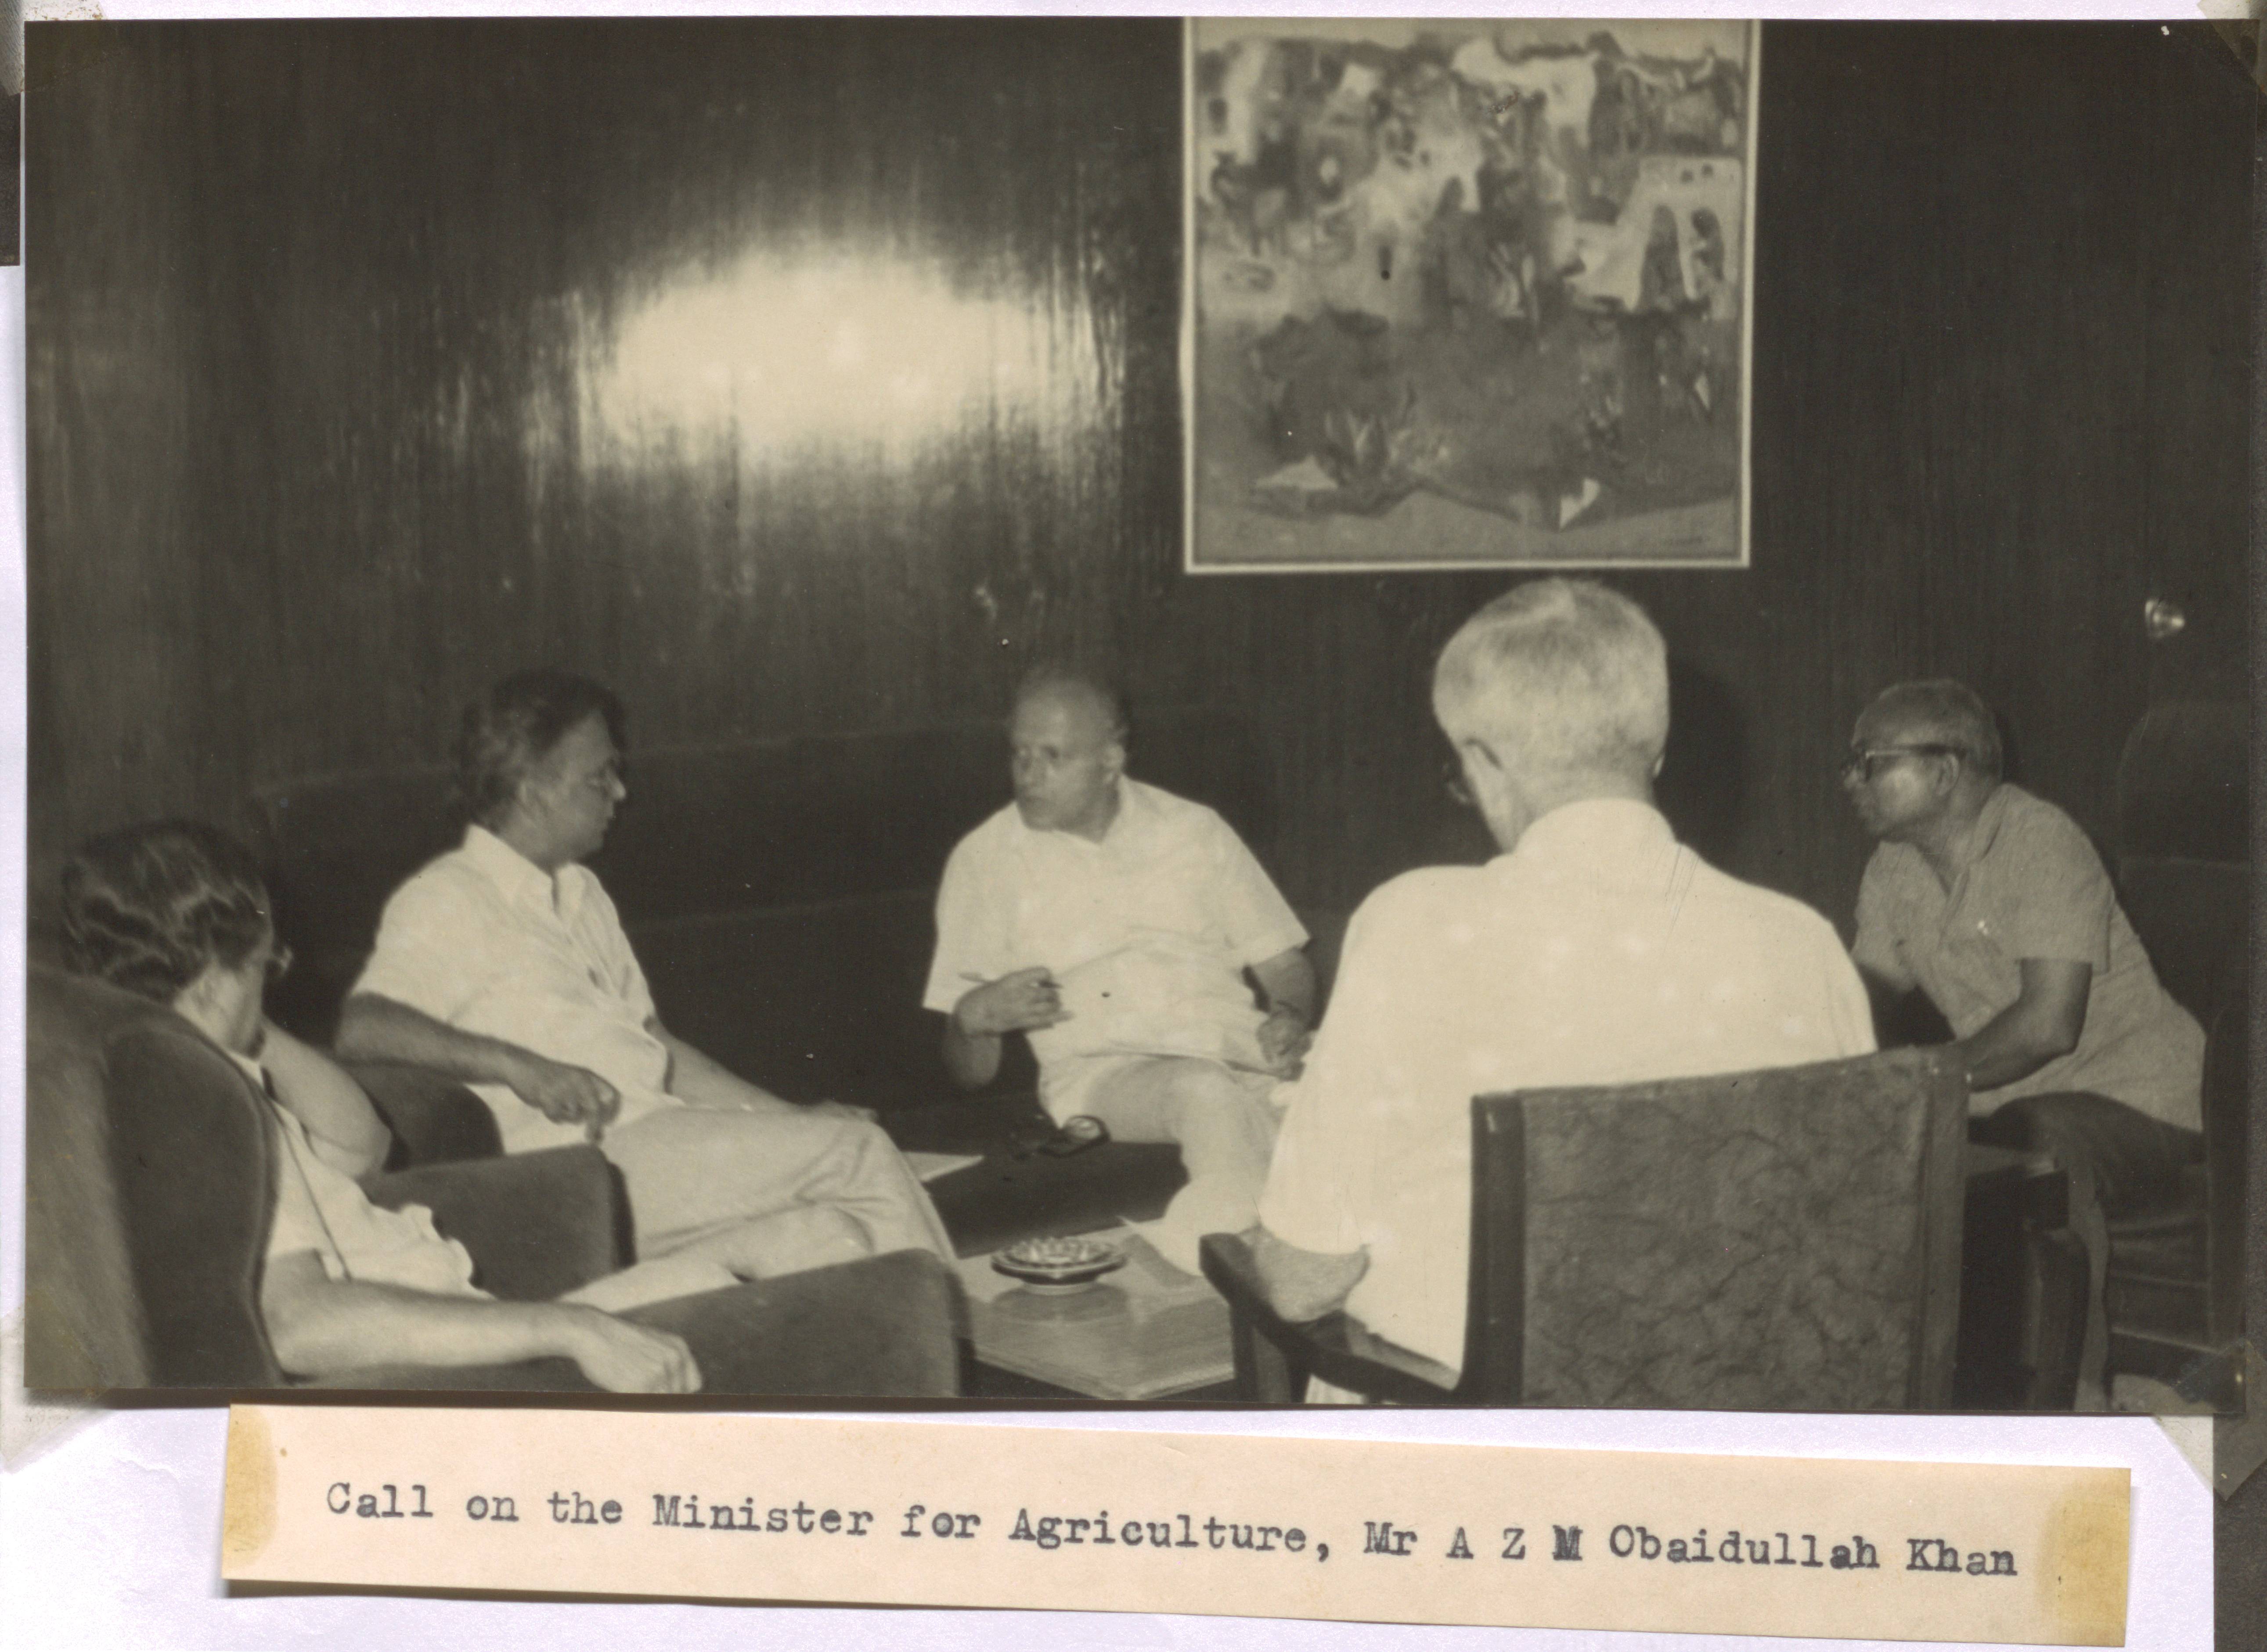 Photographs of Swaminathan with various officials - Indian and foreign